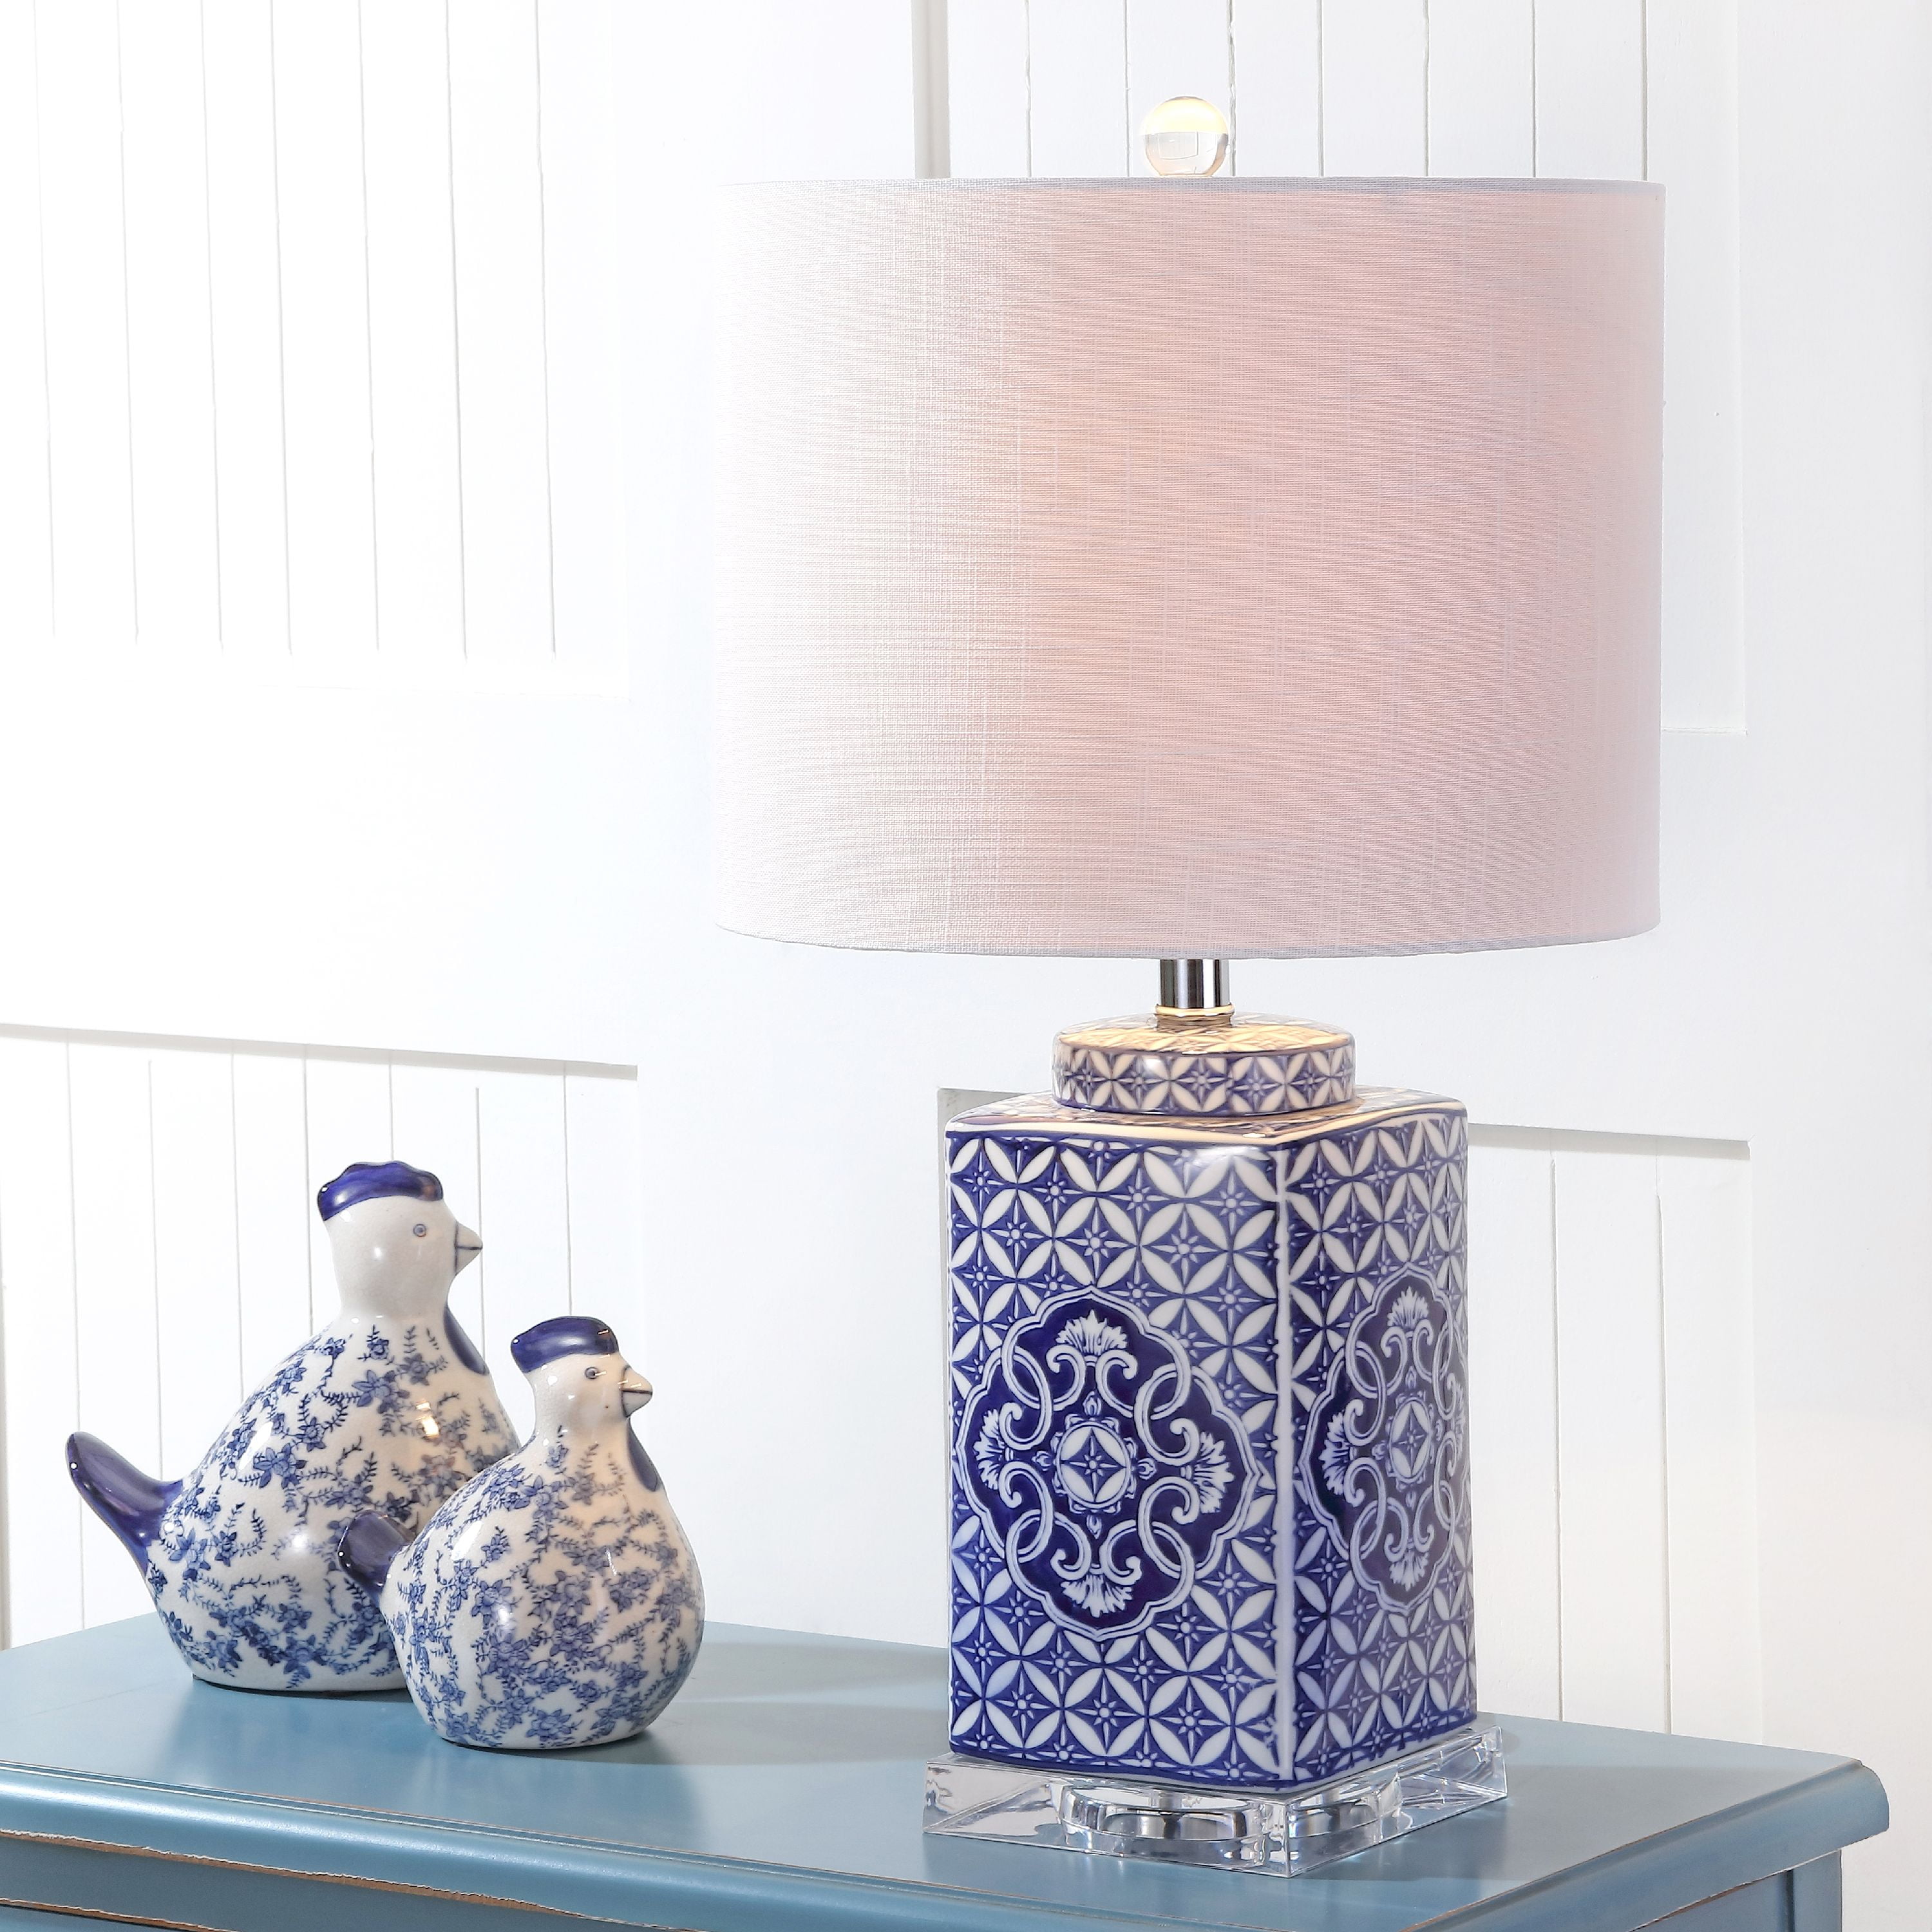 Choi 23 Chinoiserie Led Table Lamp, Blue And White Ceramic Table Lamps